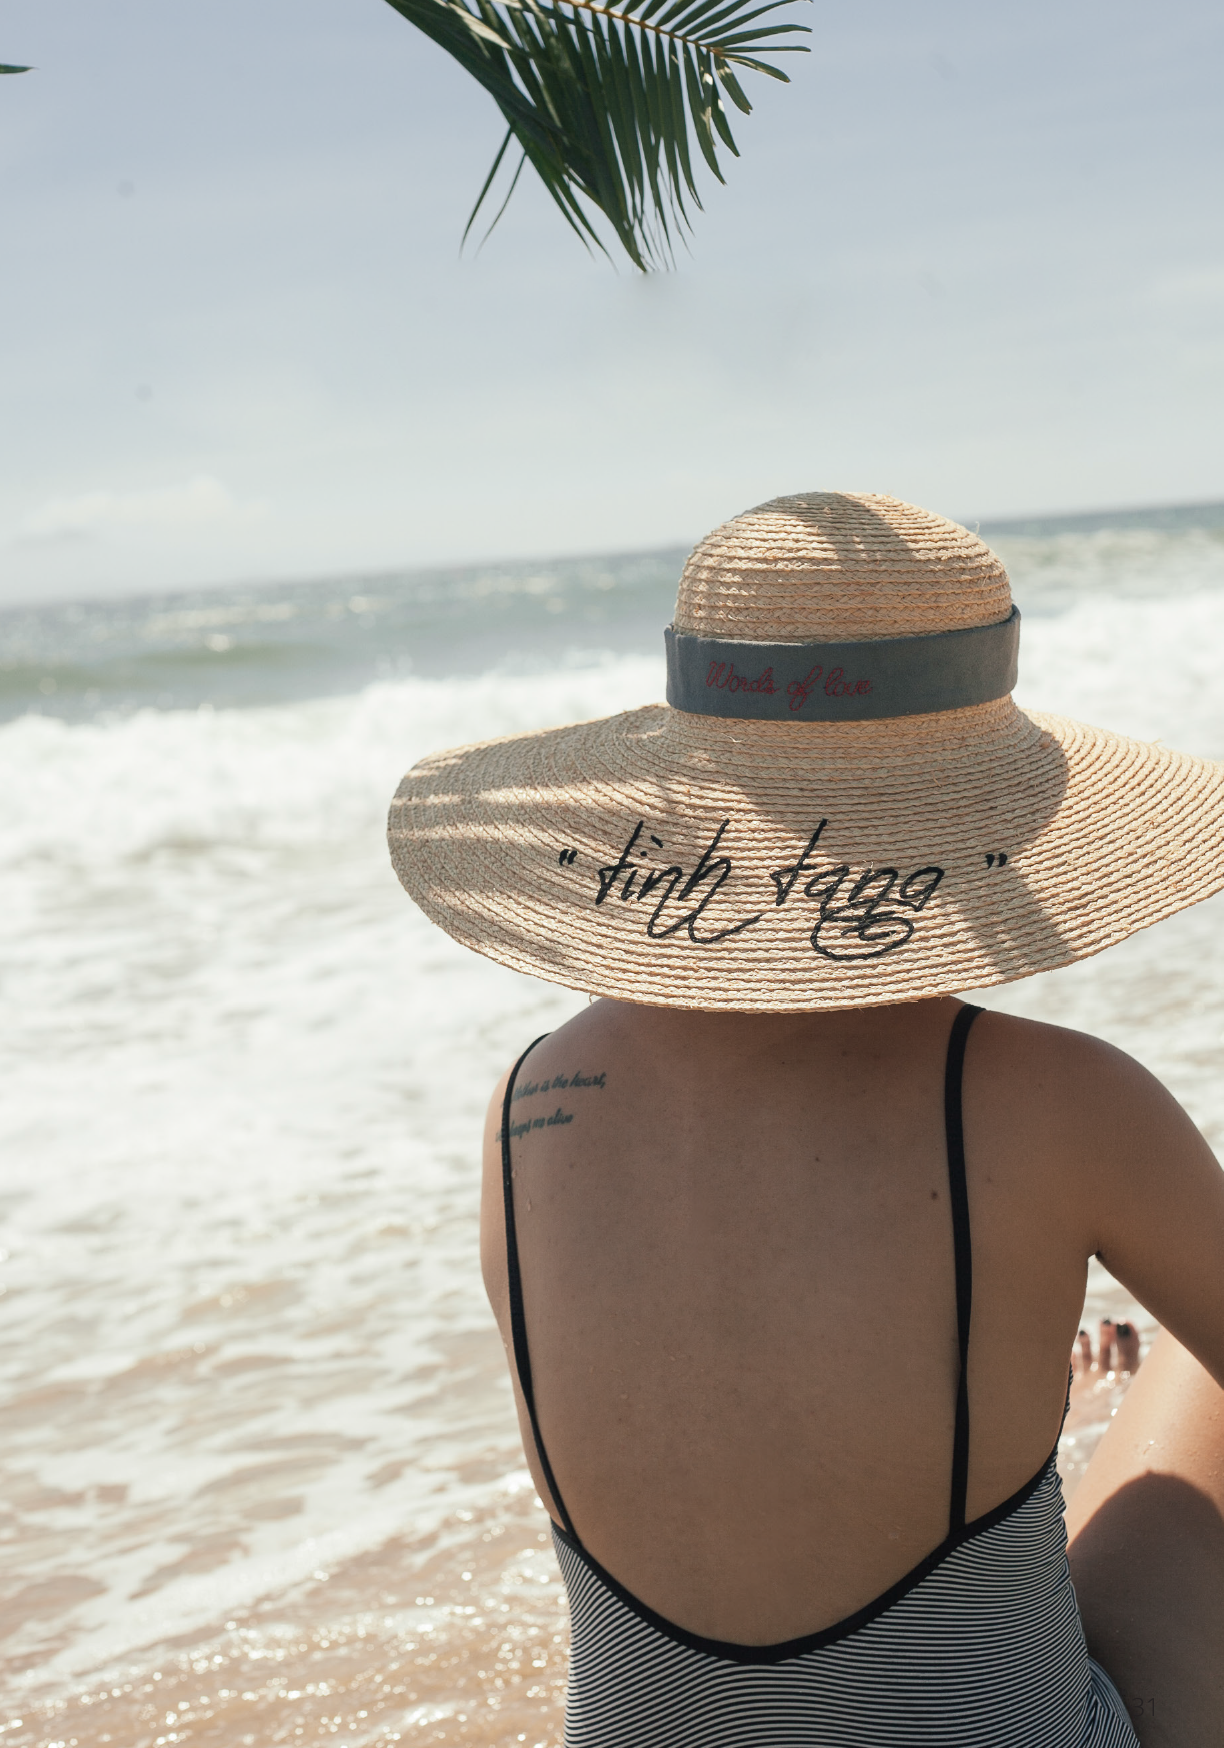 words_of_love_tinh_tang_woman_beach_hat_-_leinne